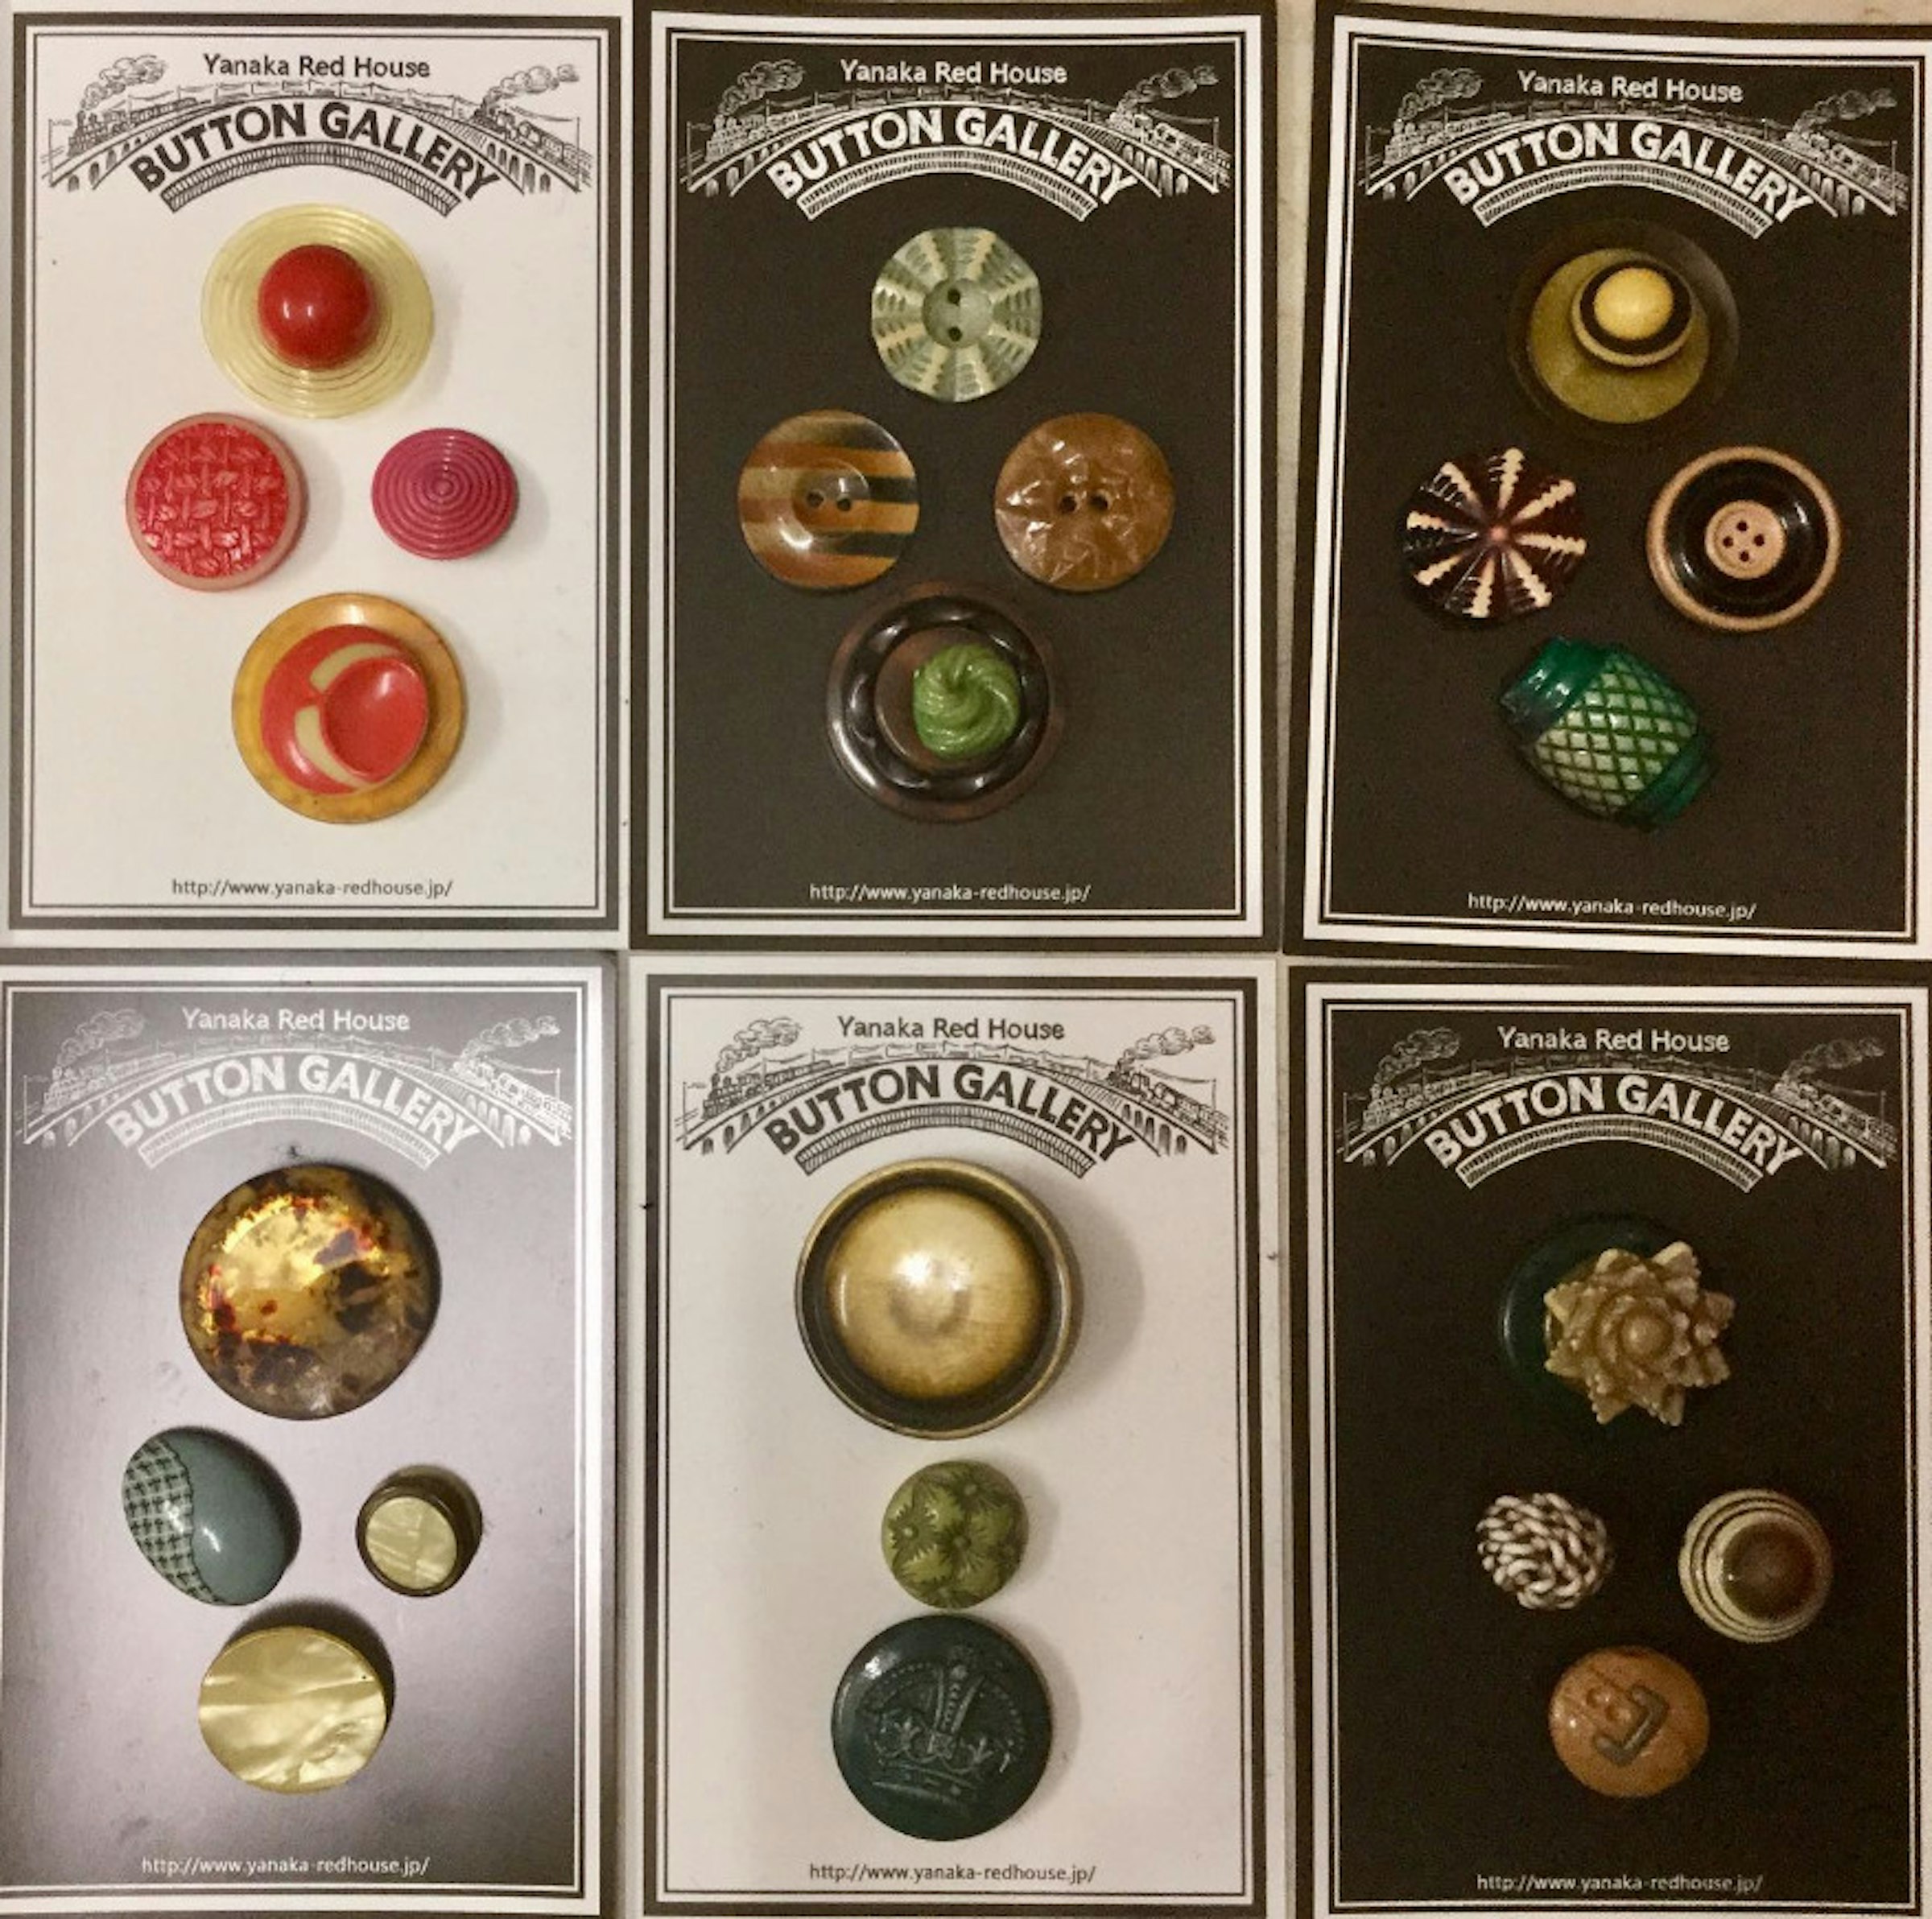 Celluloid buttons from mid-20th century. Products from an era where designs were varied and playful